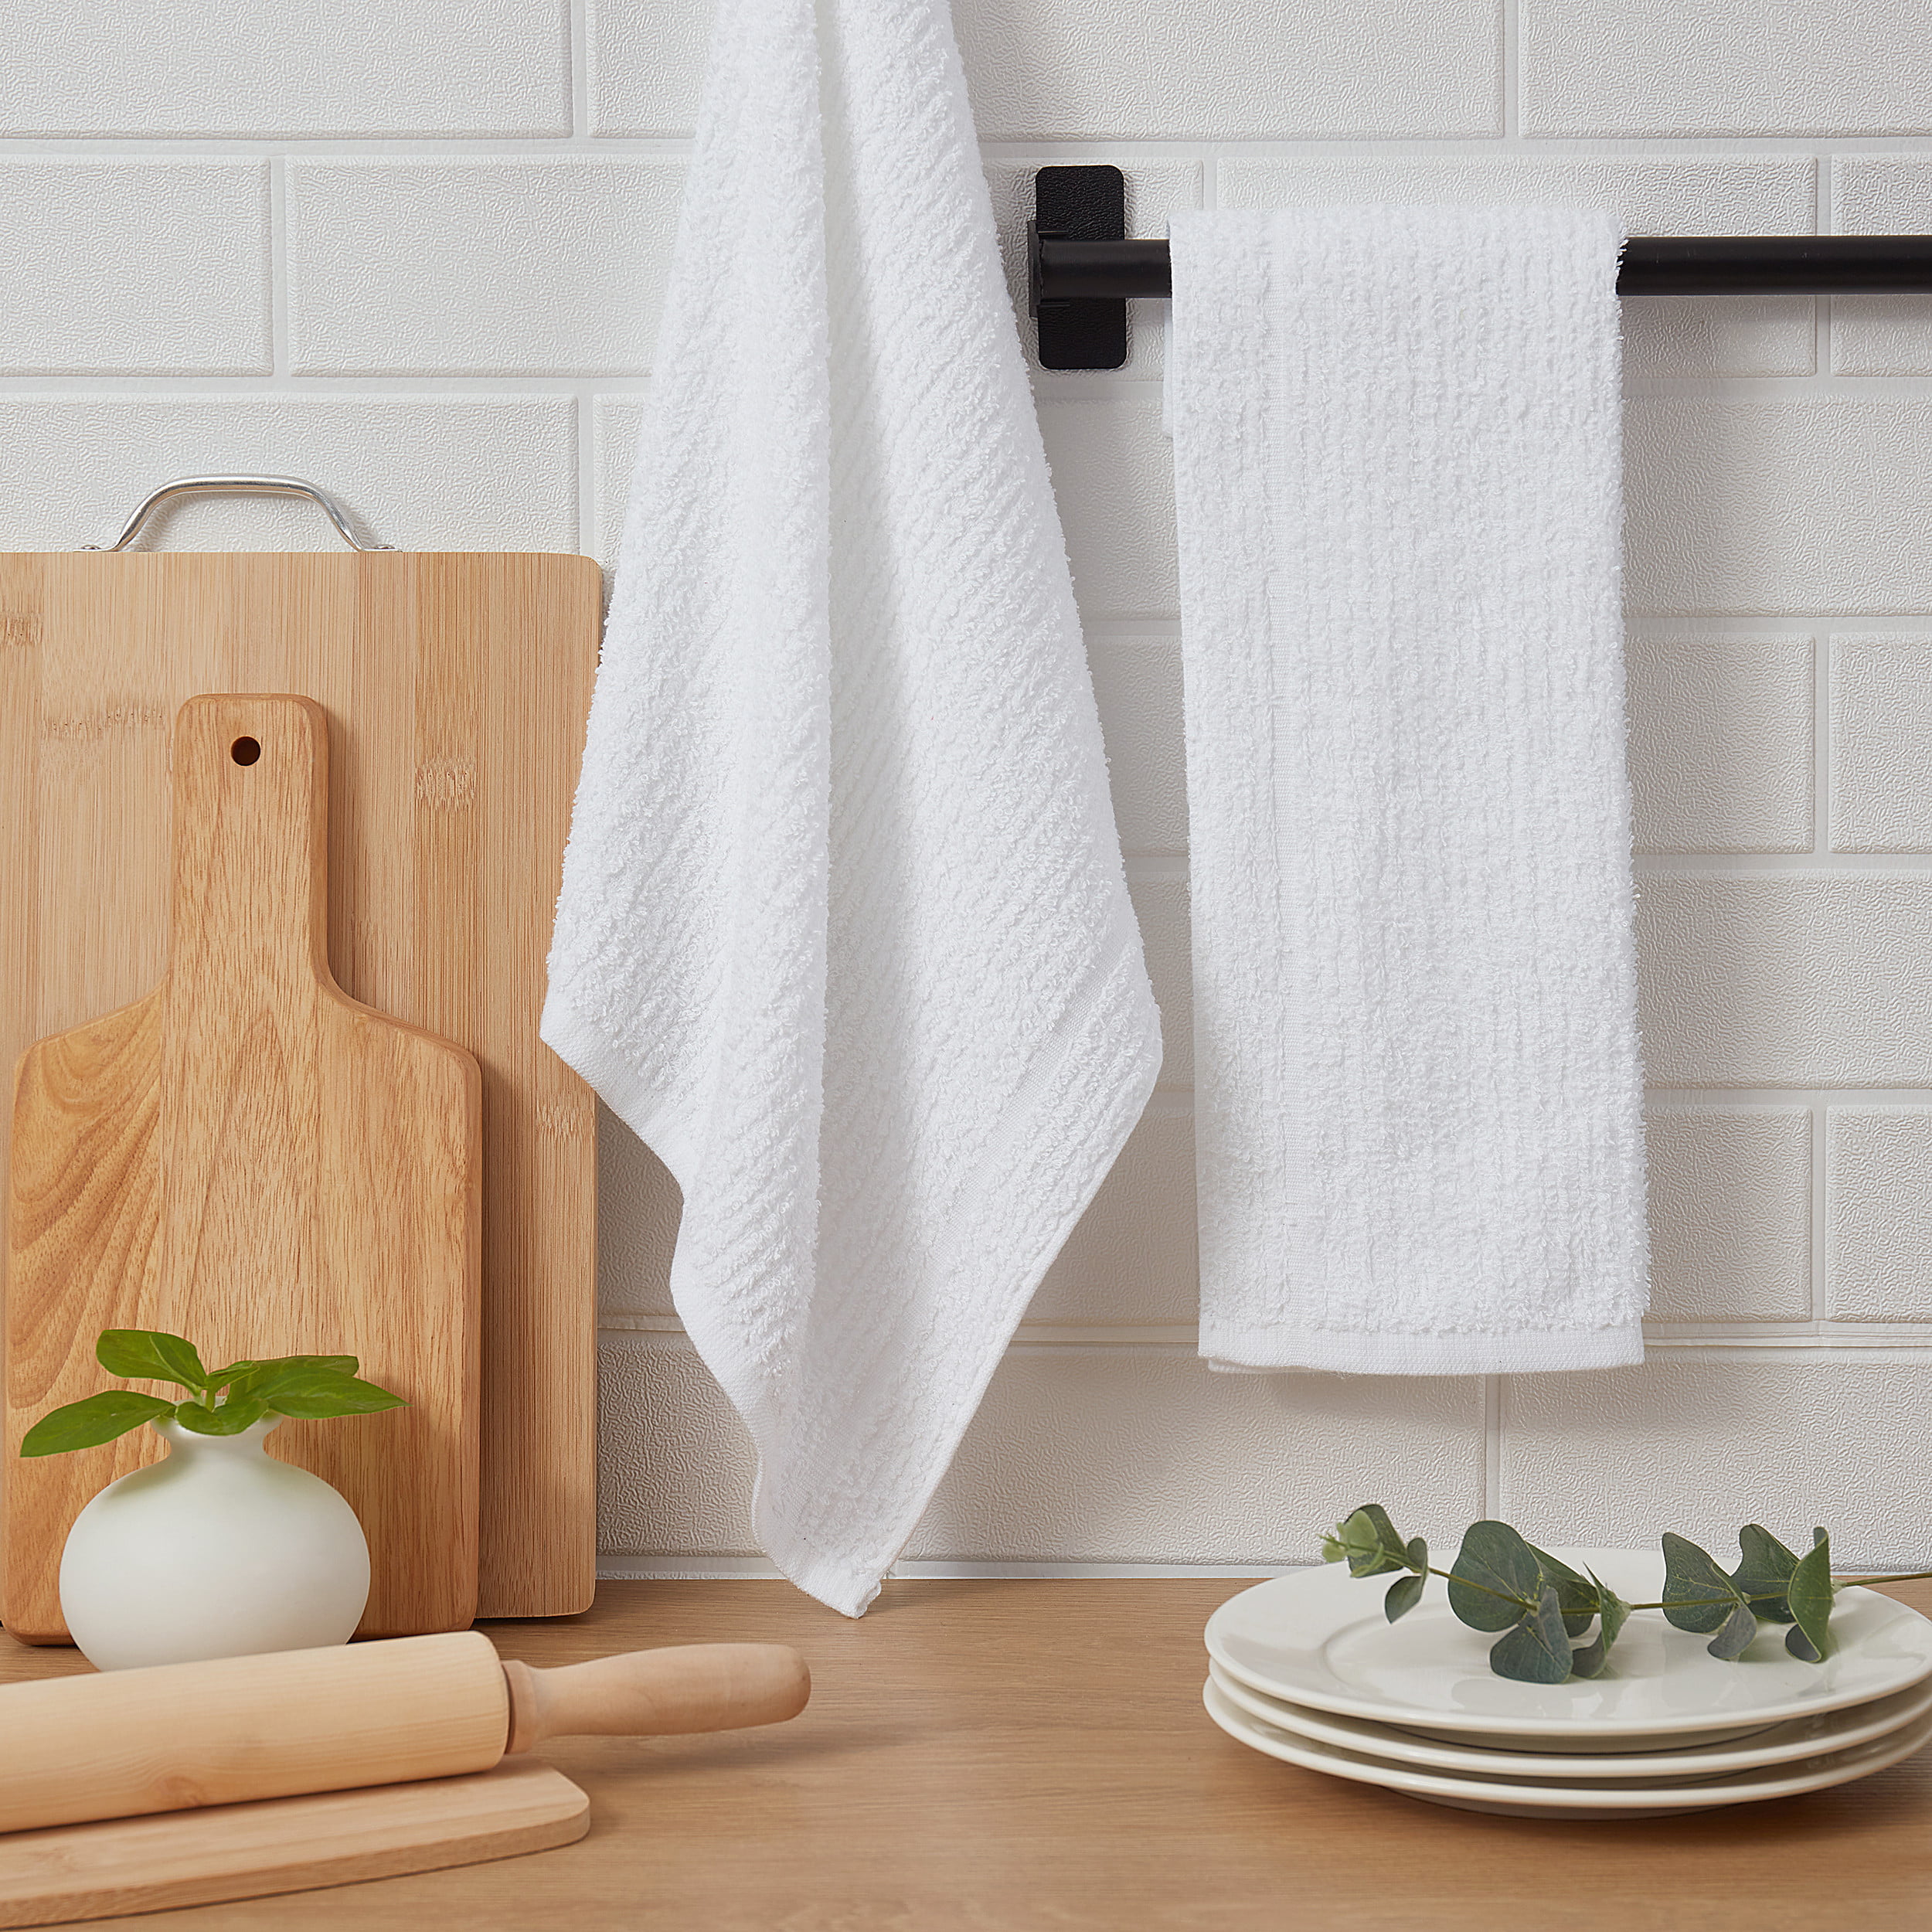 Flour Sack Towels: The One Household Item Everyone Needs (A Lot Of) —  Mary's Kitchen Towels